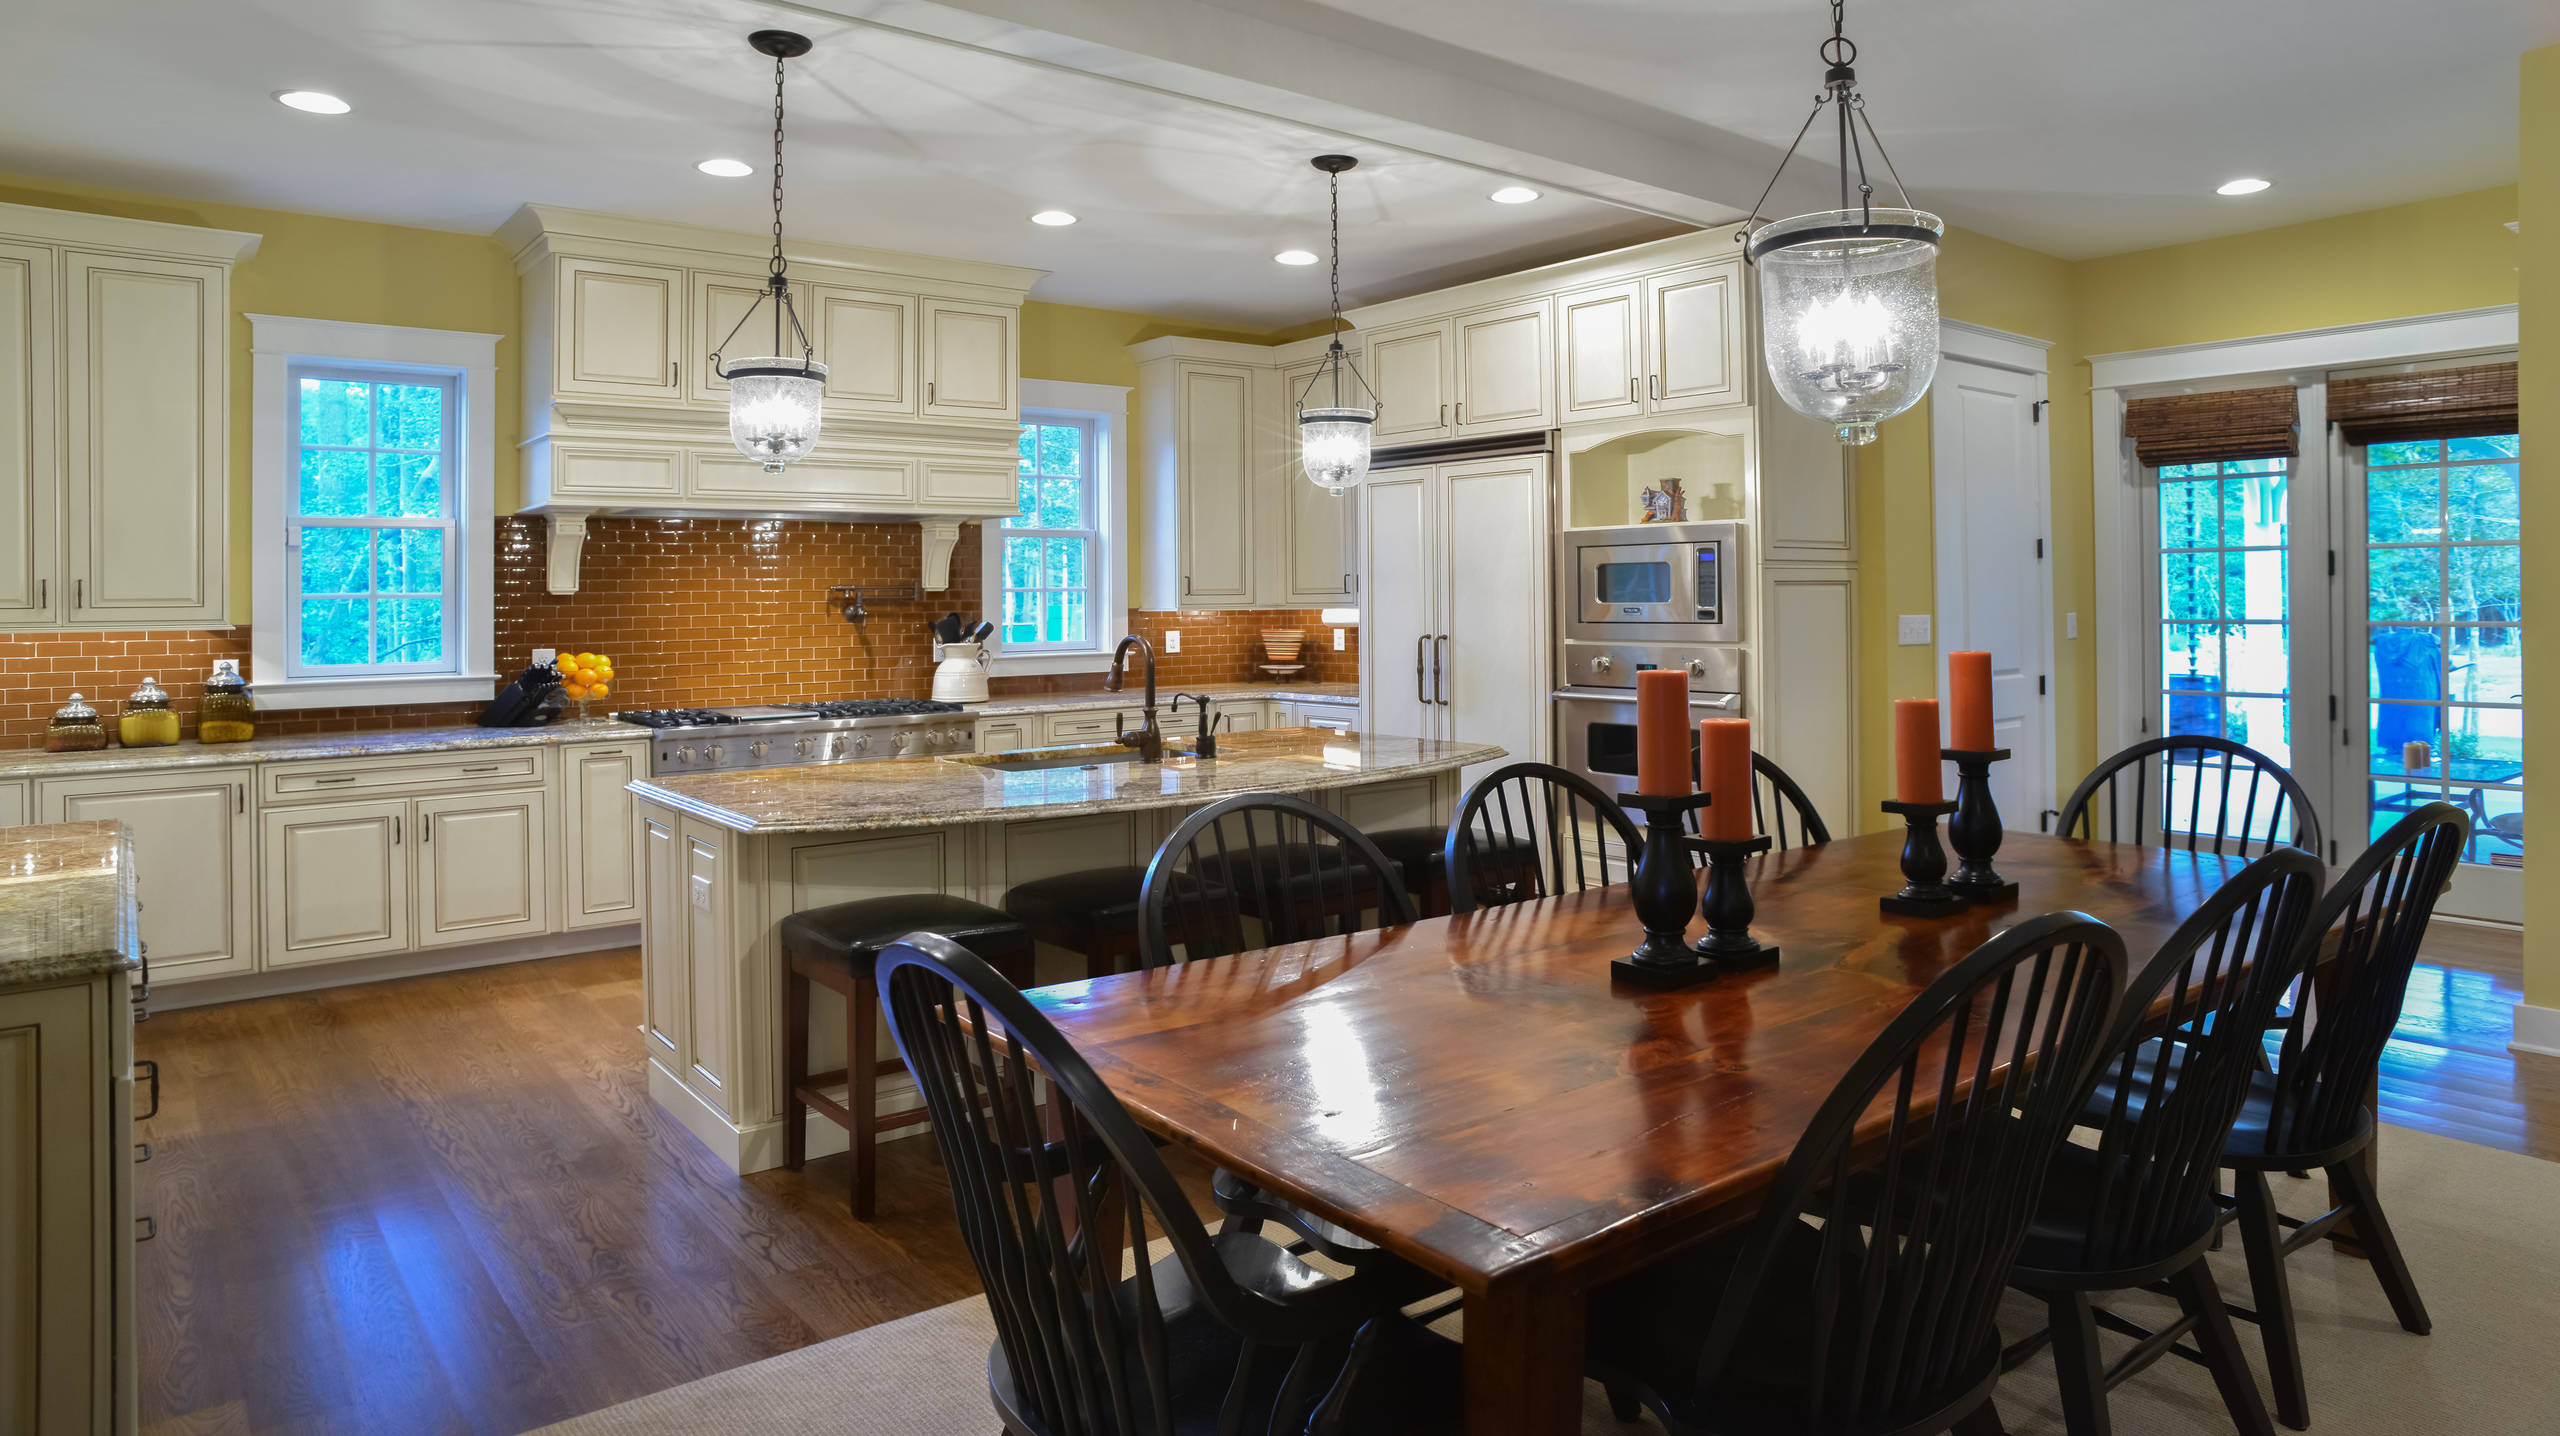 Elberton Way (SL-1561) by architect Mitchell Ginn - Traditional - Kitchen -  DC Metro - by The Lewes Building Company | Houzz